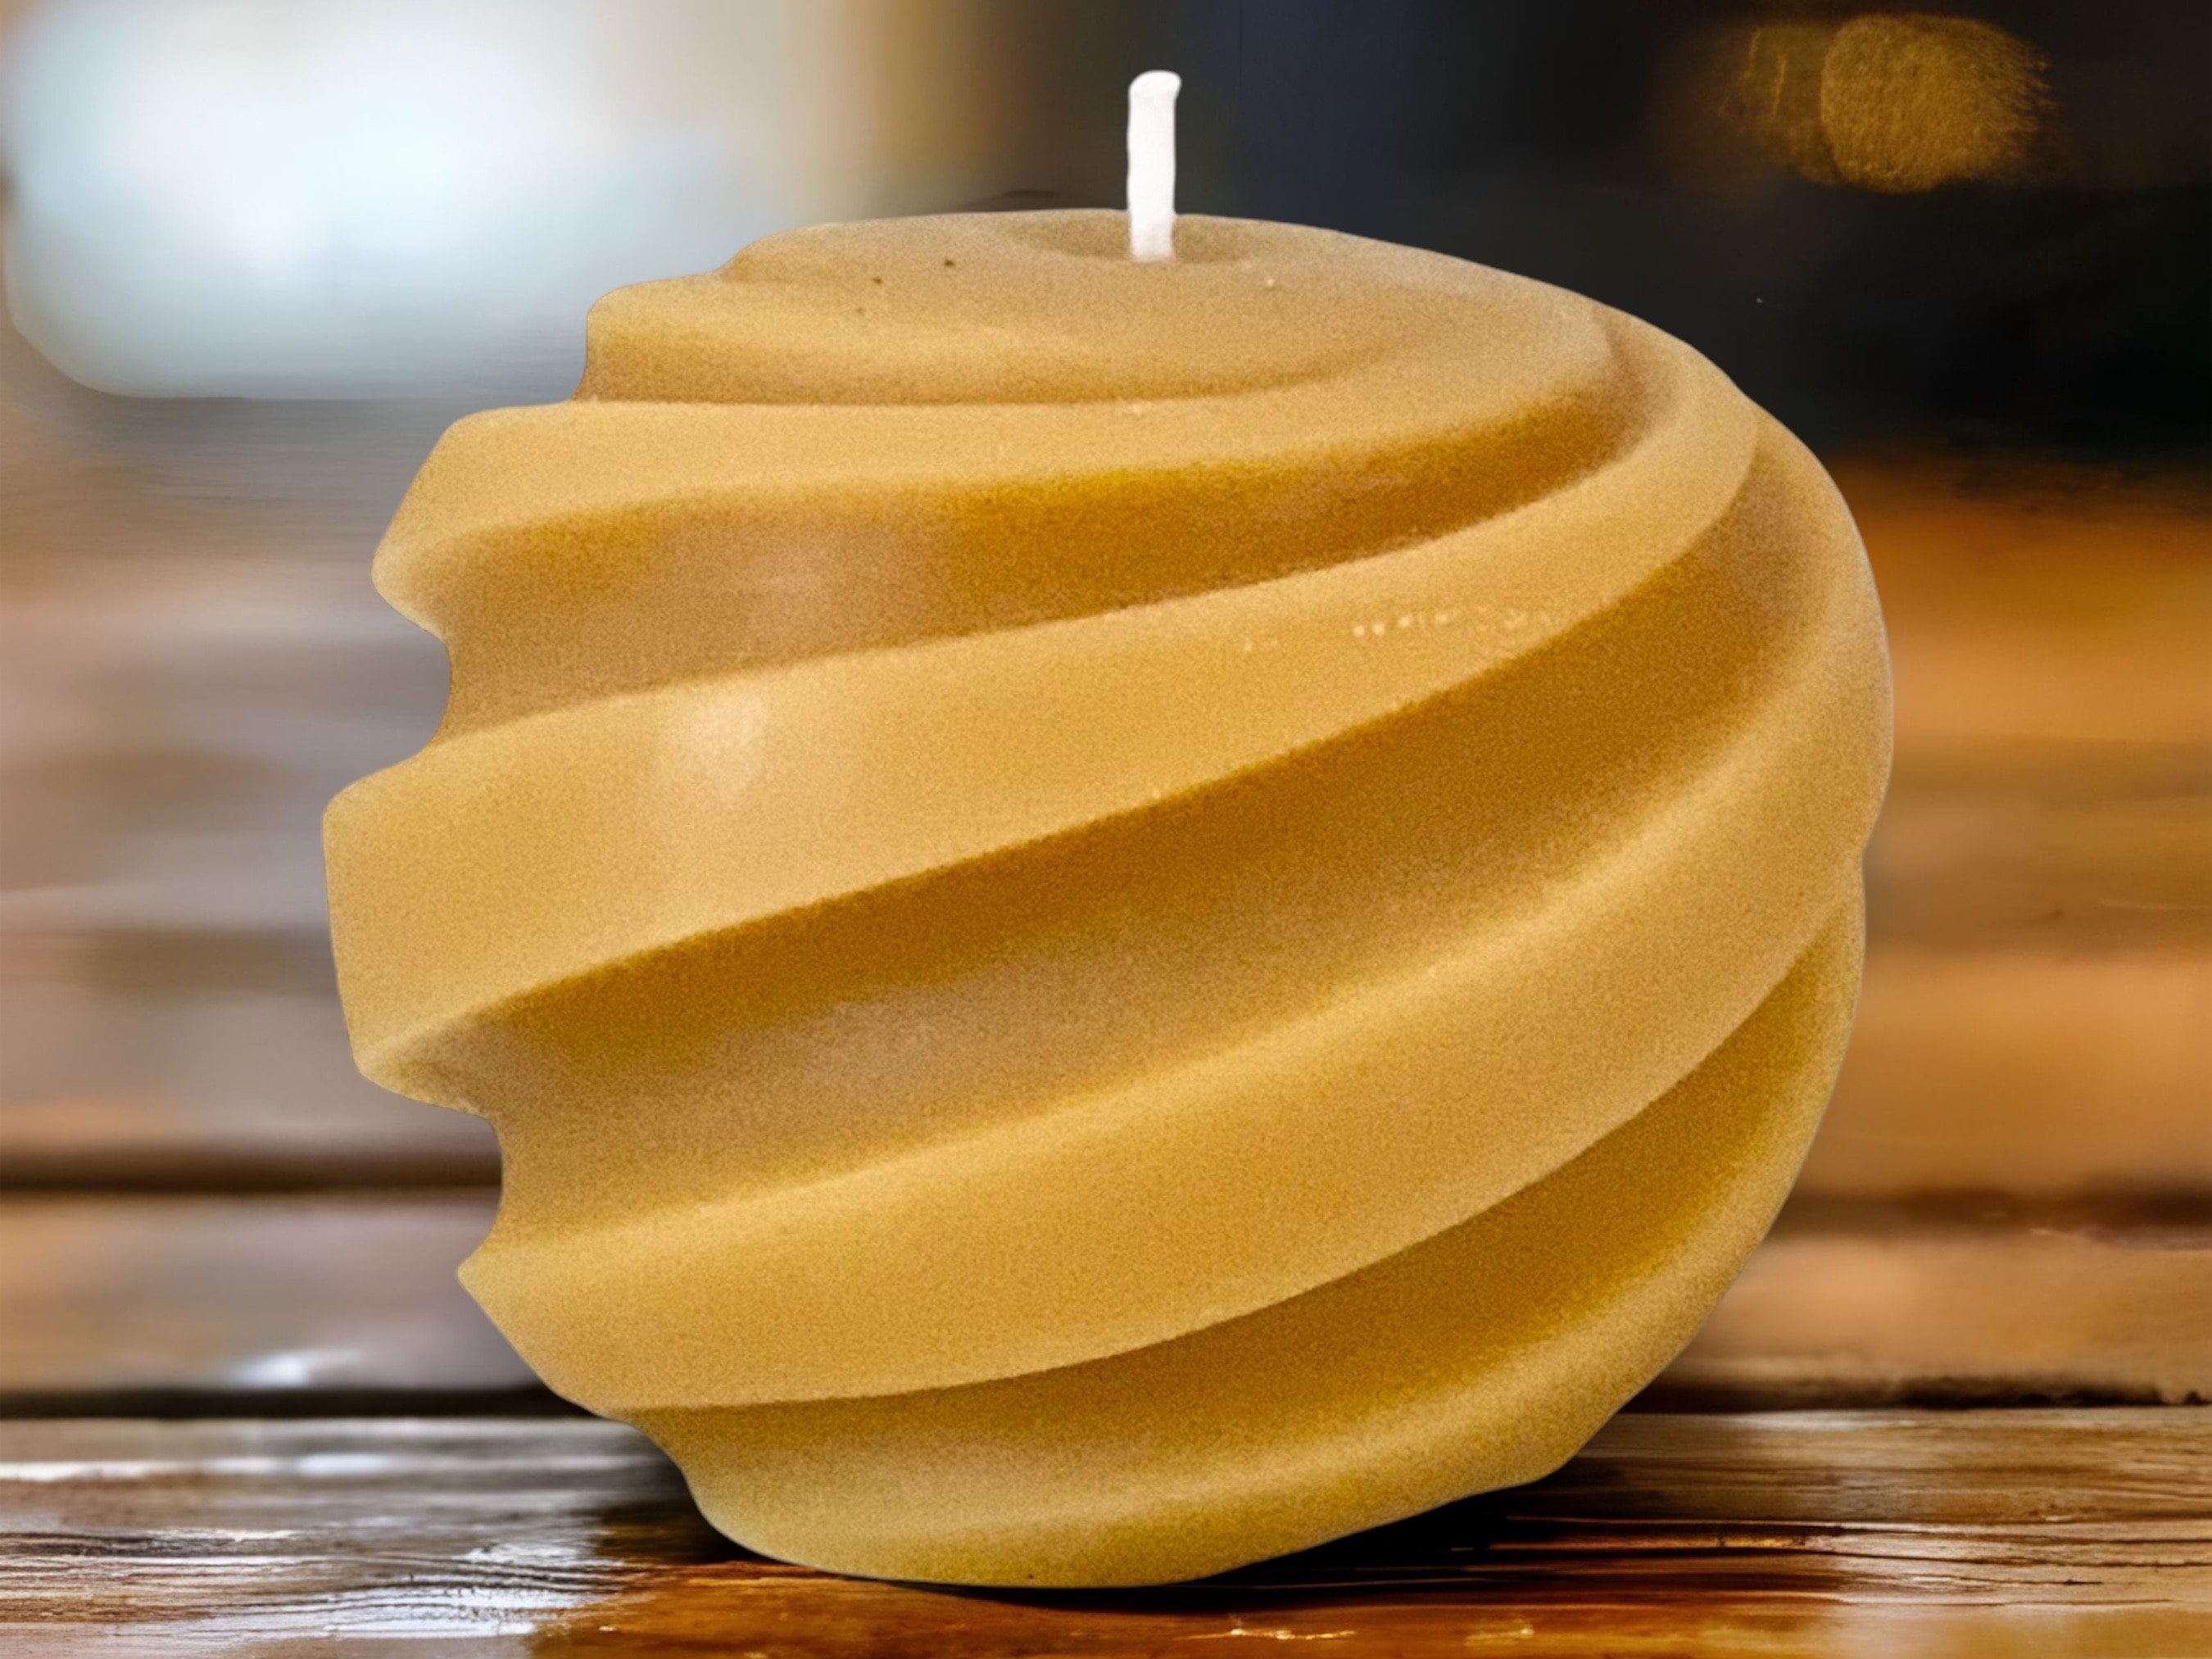 Beeswax Sphere Candles